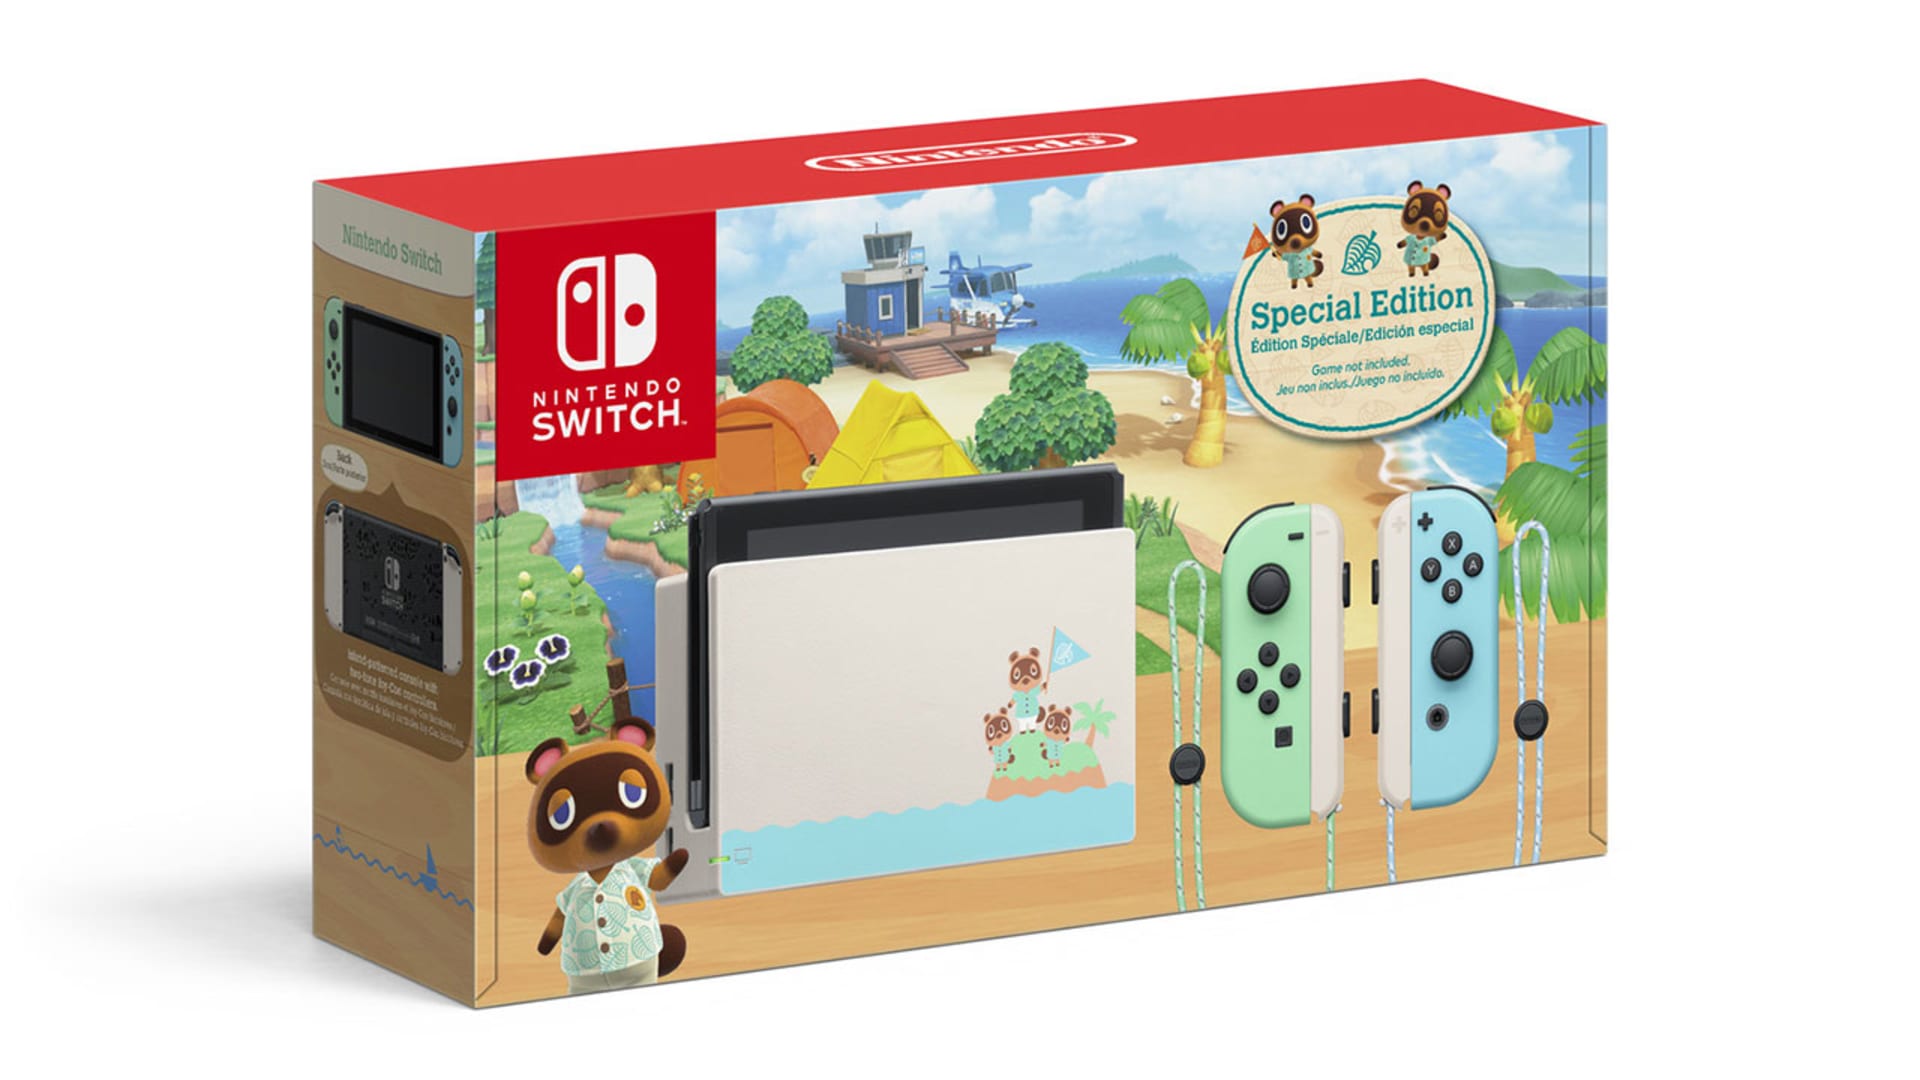 Nintendo Switch Animal Crossing New Horizons Edition Nintendo Official Site